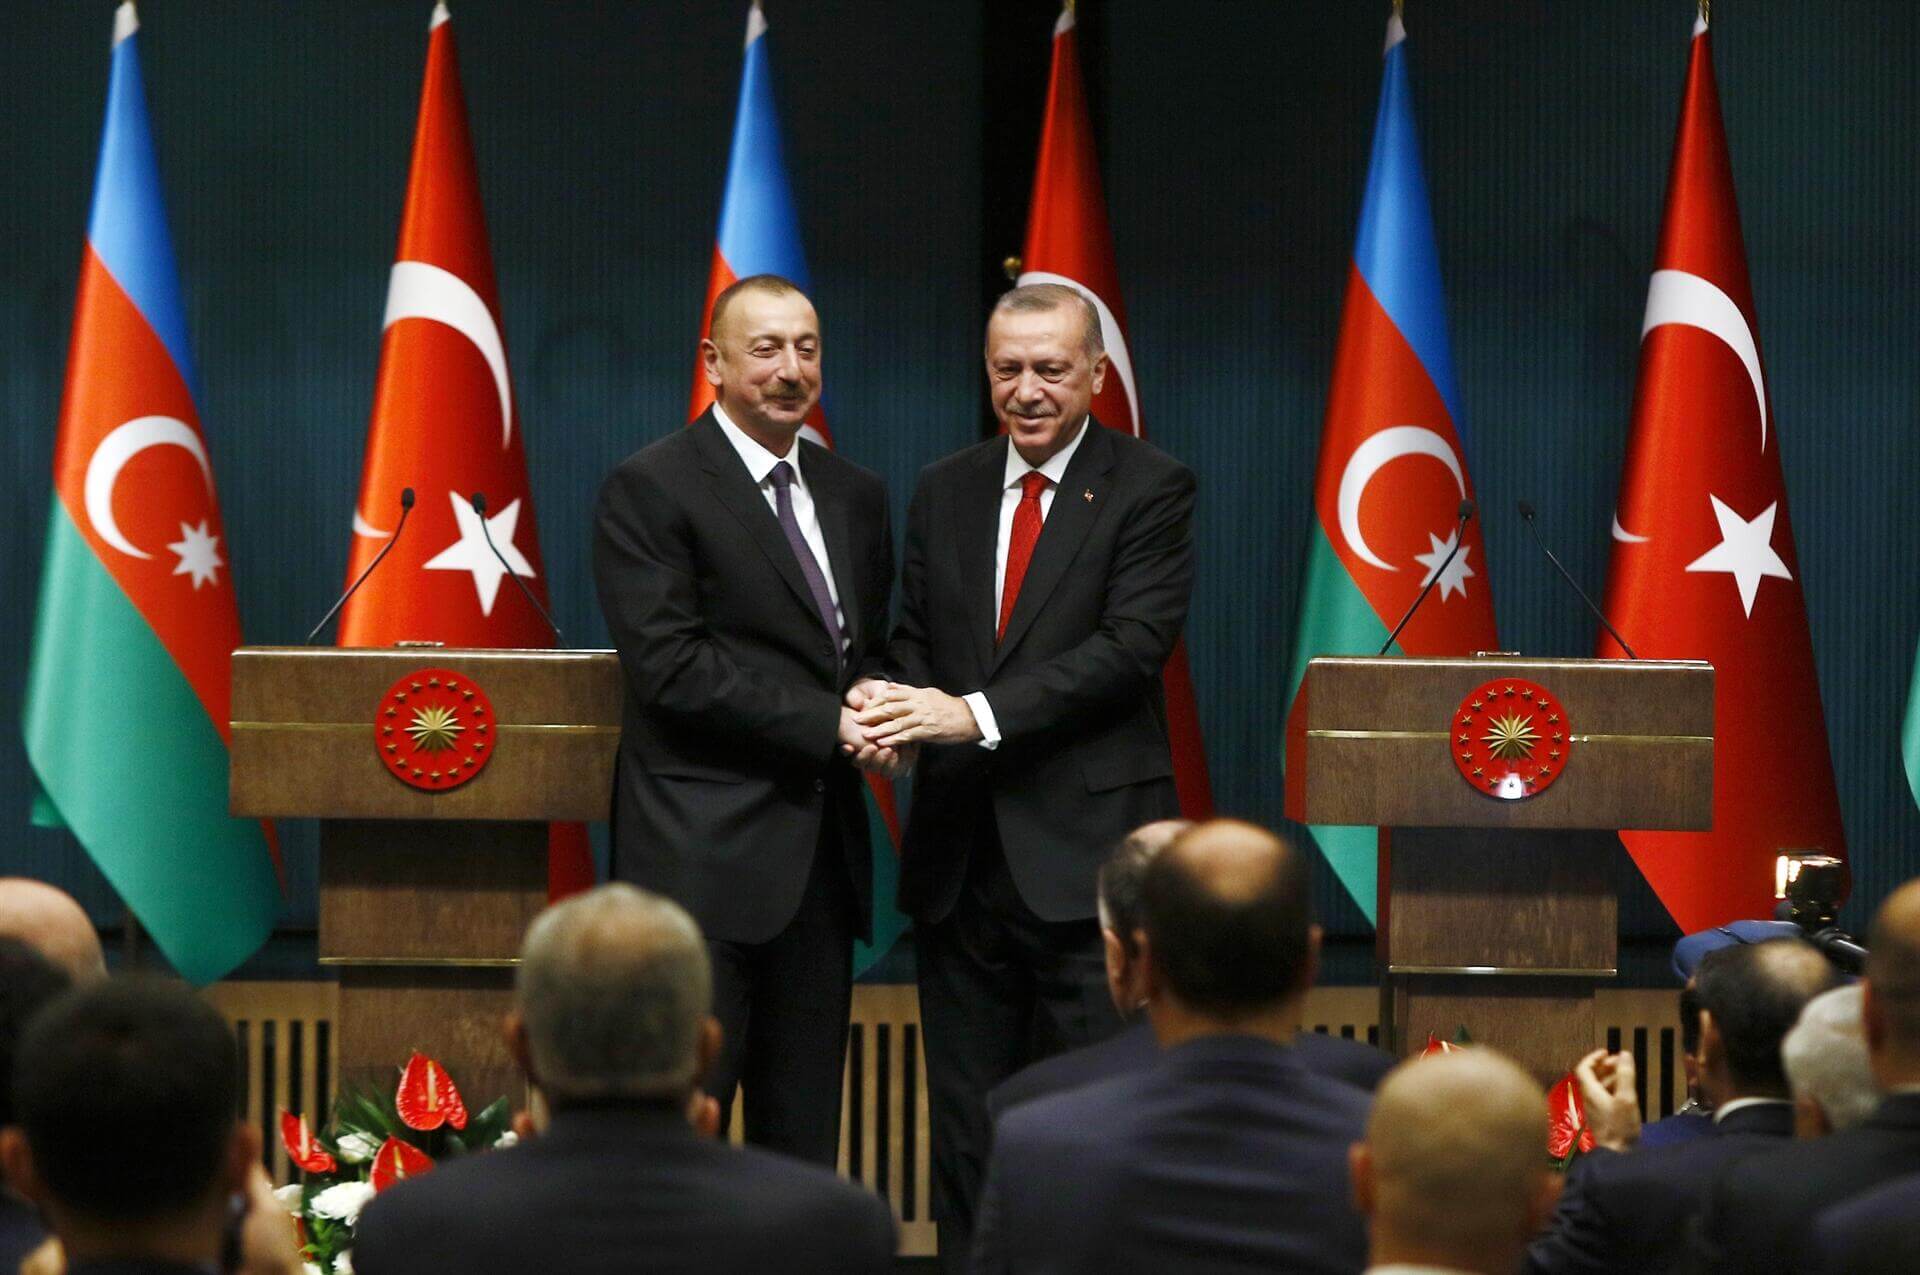 Turkish National Security Council Reiterates Support to Azerbaijan in Armenia Conflict